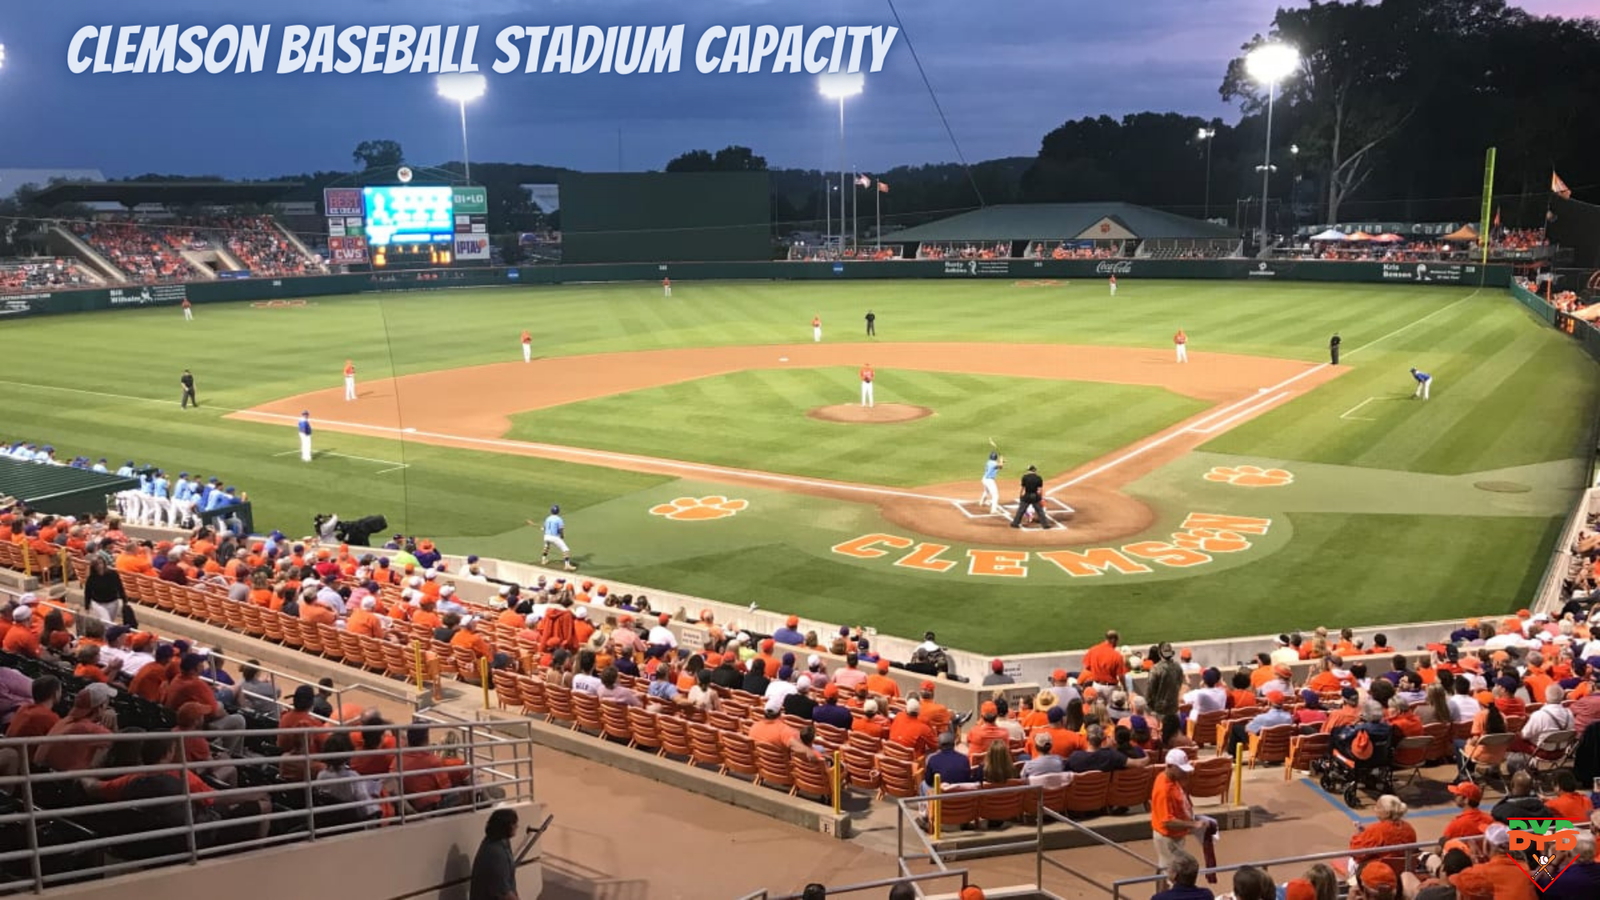 The Ultimate Guide to Clemson Baseball Stadium Capacity Everything You